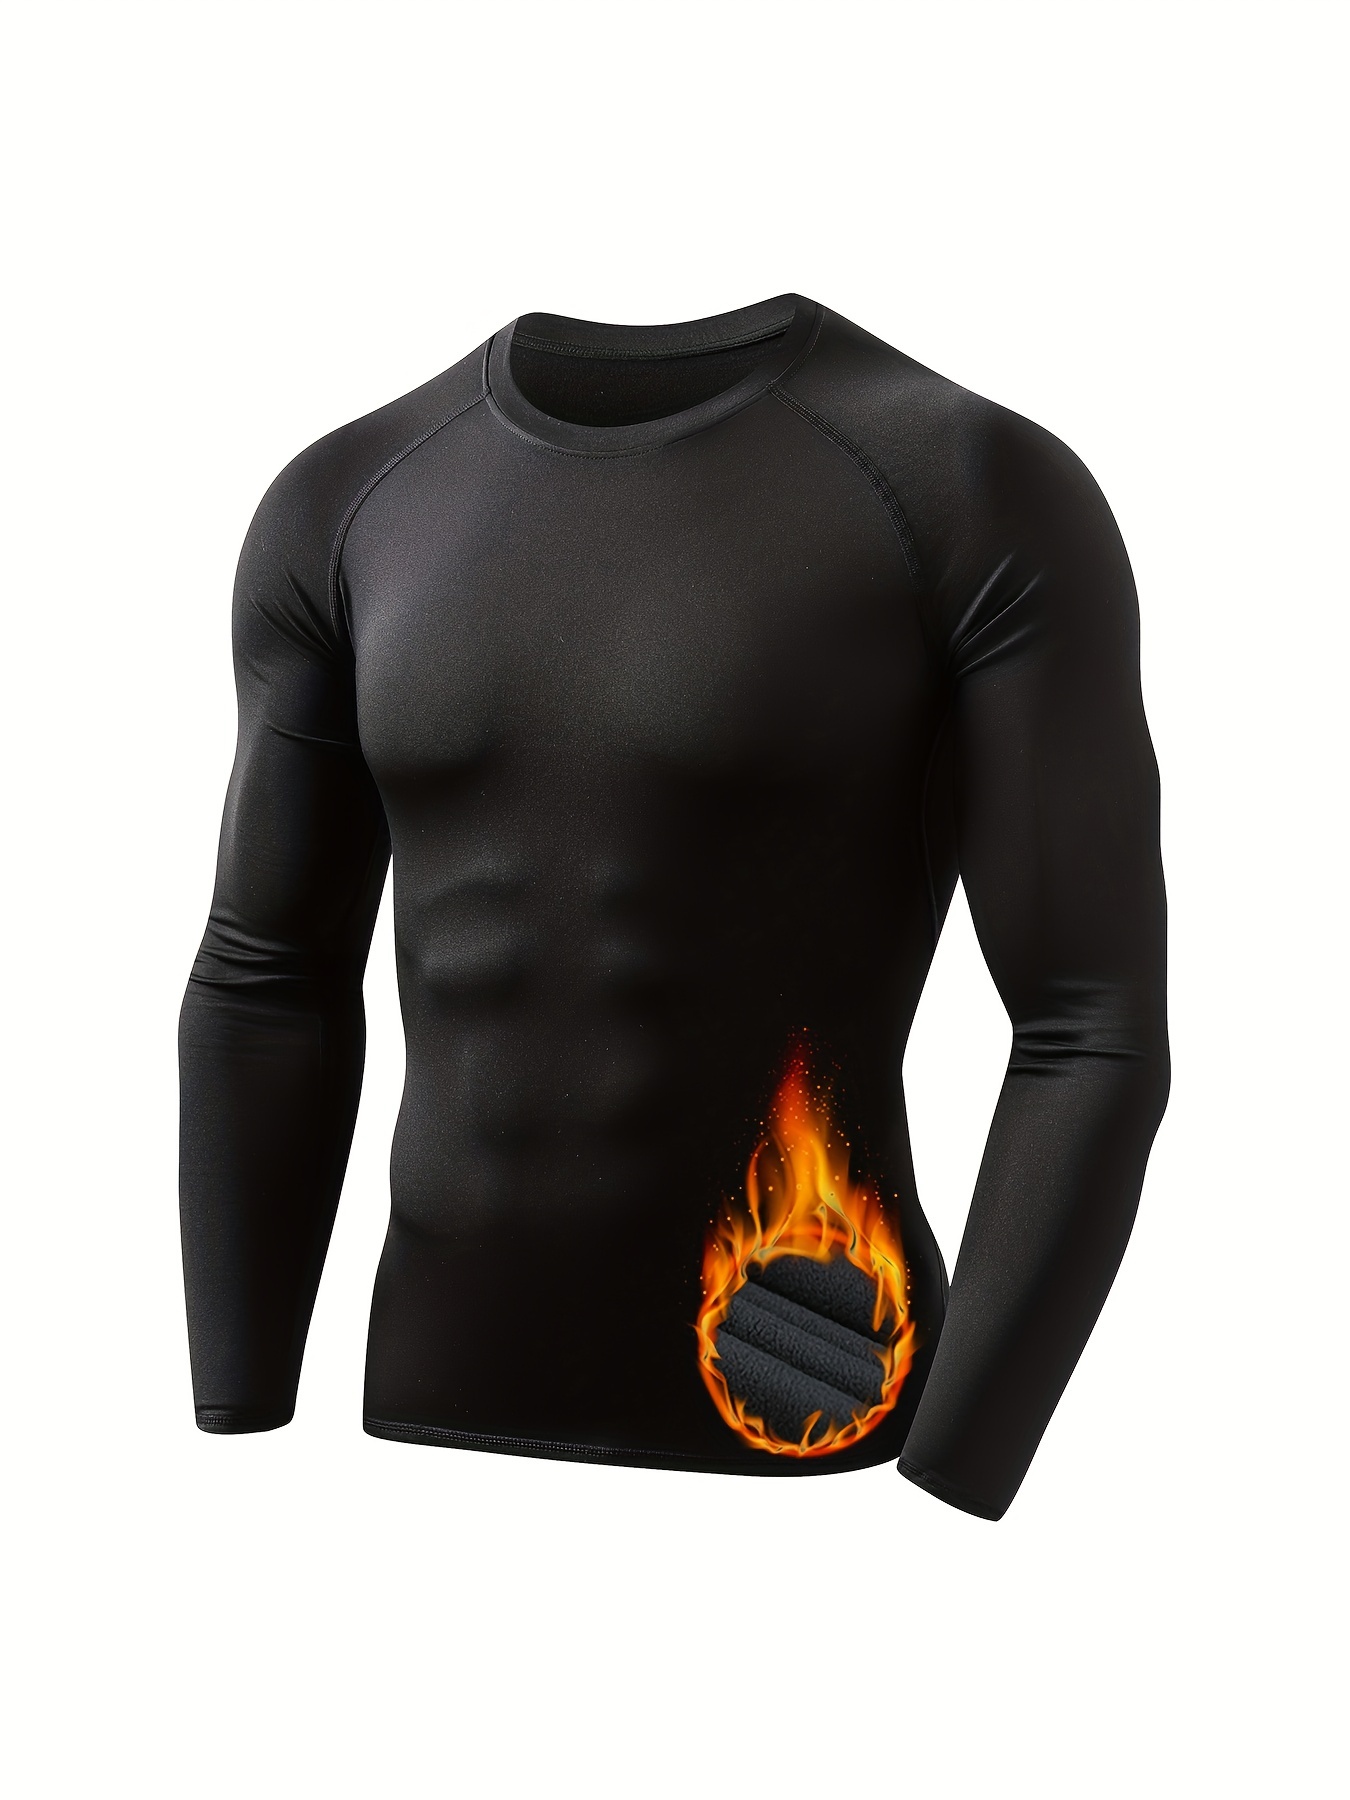 HOPLYNN Thermal Underwear Men's Moisture Wicking Baselayer Breathable  Active Shirt Men Fall Winter For Jogging, Cycling, Football, Skiing,  Motorcycle